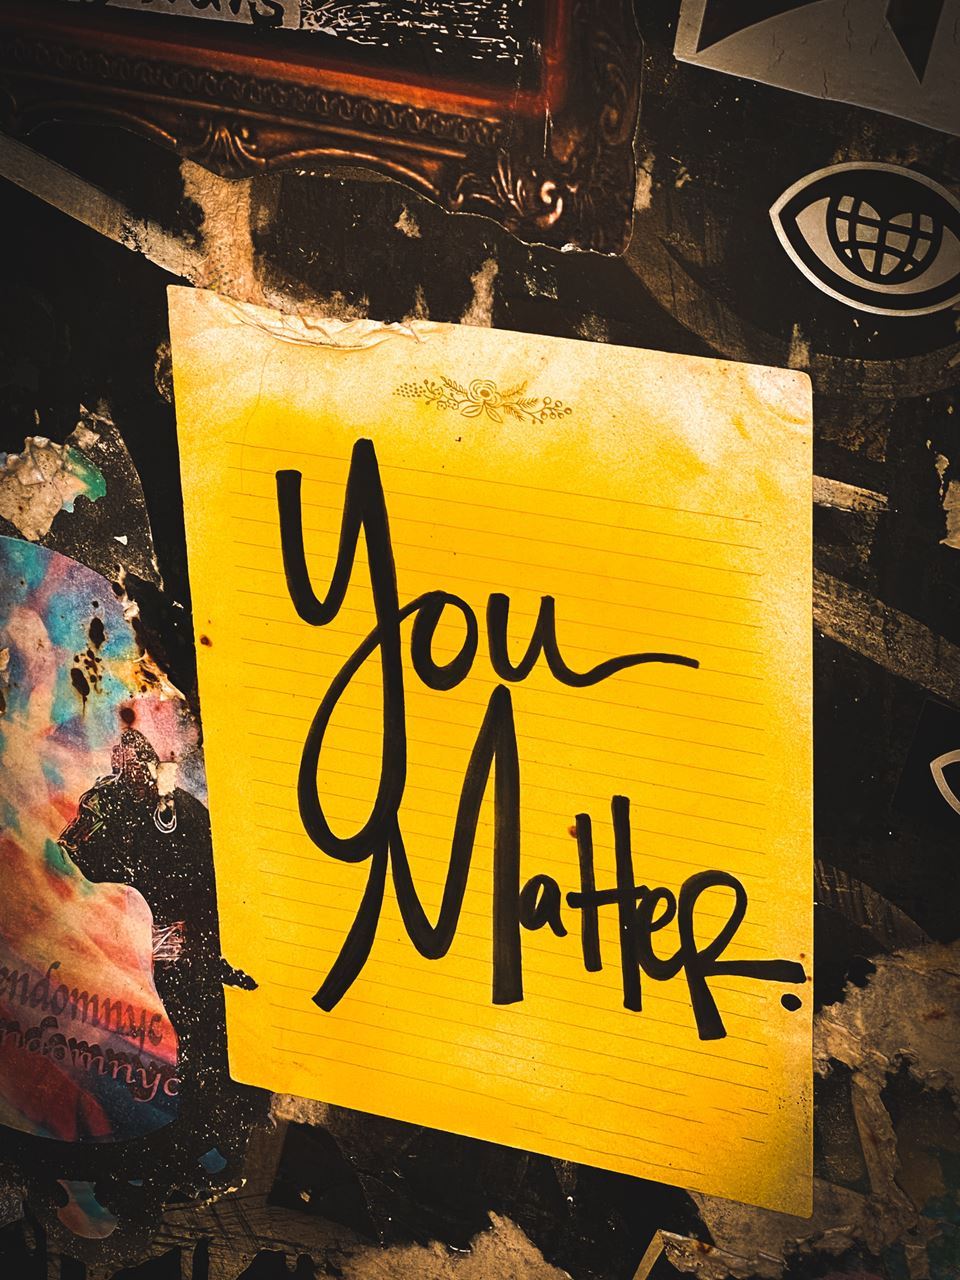 The text "You Matter" written on a sheet of yellow notebook paper, against a graffiti-style background